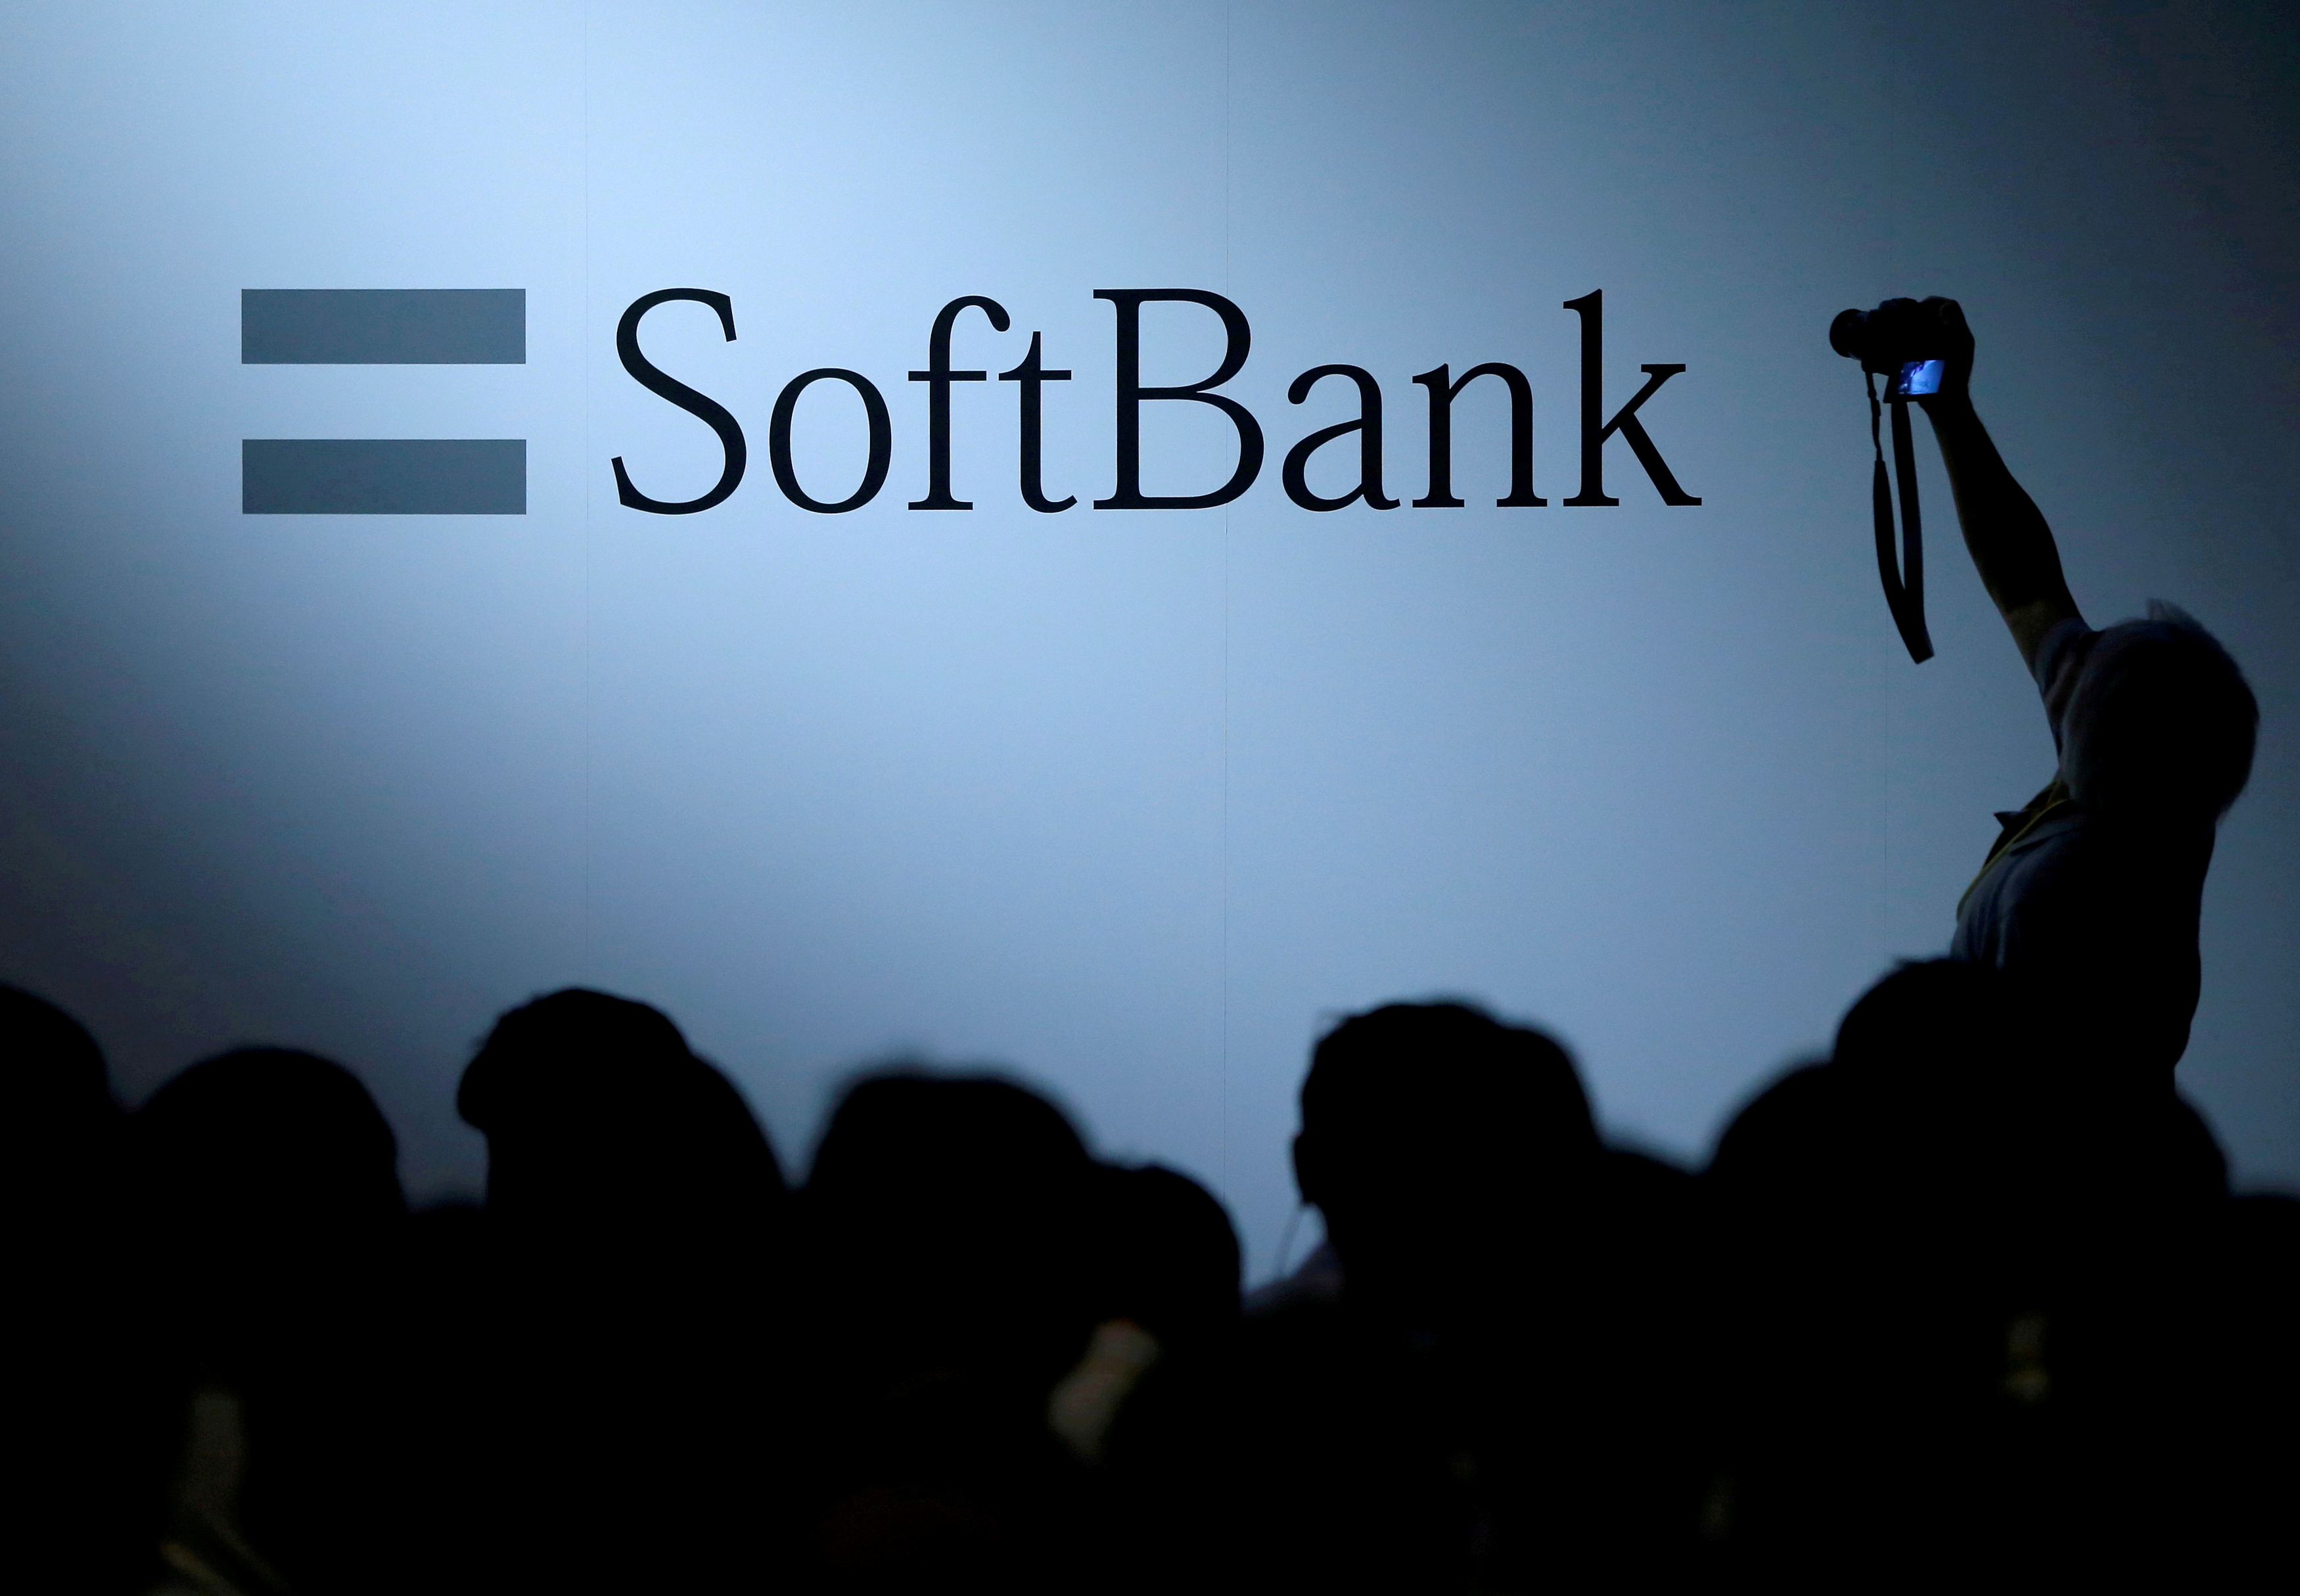 The logo of SoftBank Group Corp is displayed at SoftBank World 2017 conference in Tokyo, Japan, July 20, 2017. REUTERS/Issei Kato/File Photo